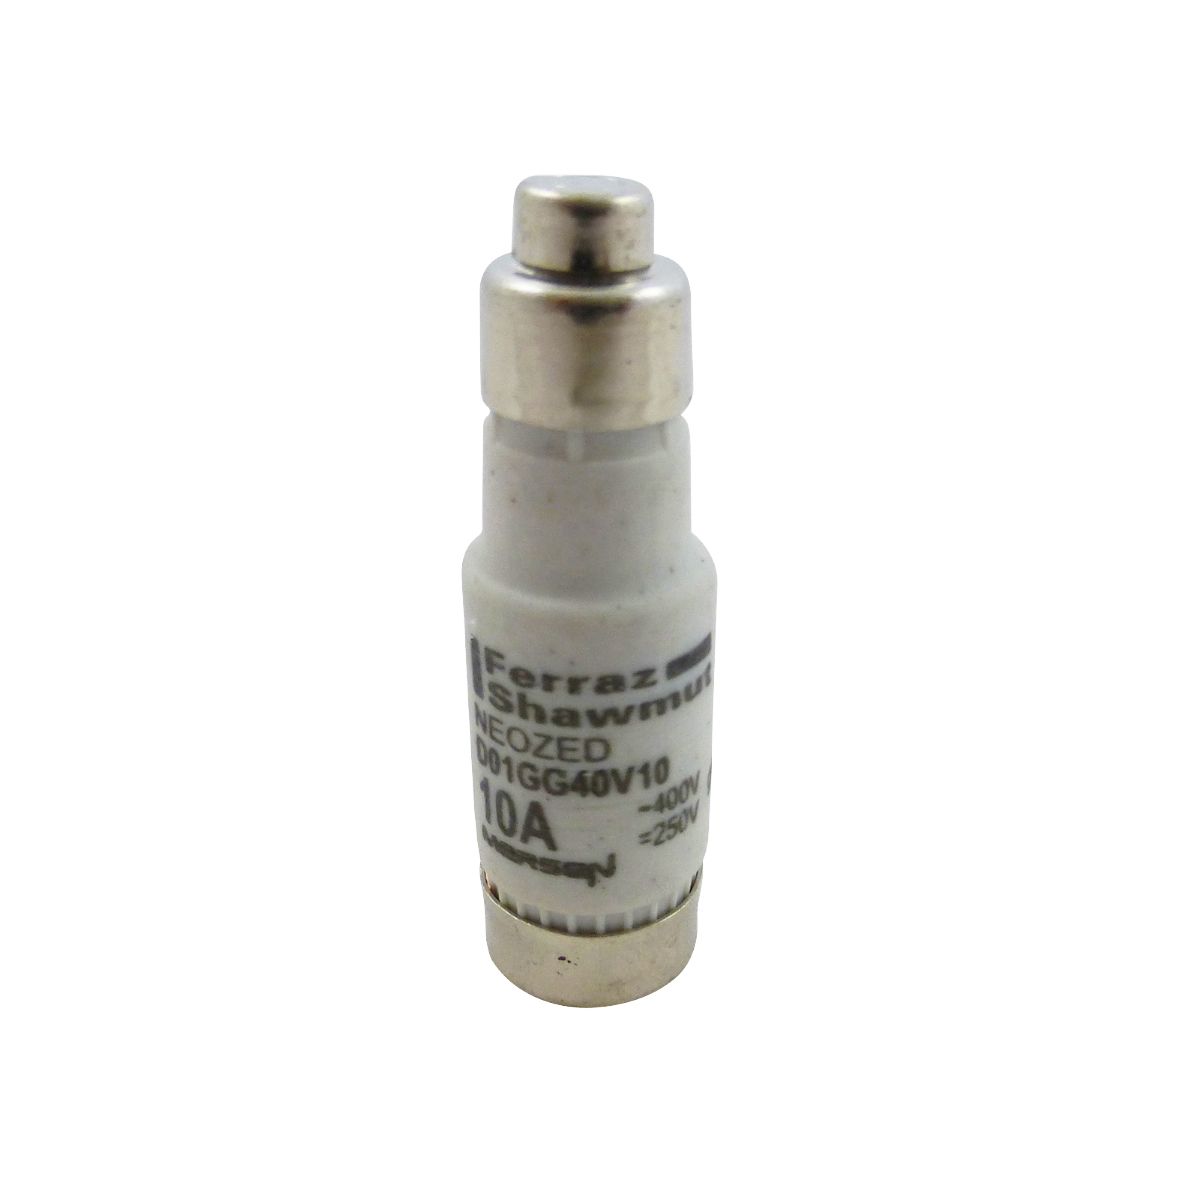 W211090 - Neozed D0 fuse-link gG, 400VAC, D01, 10A, red